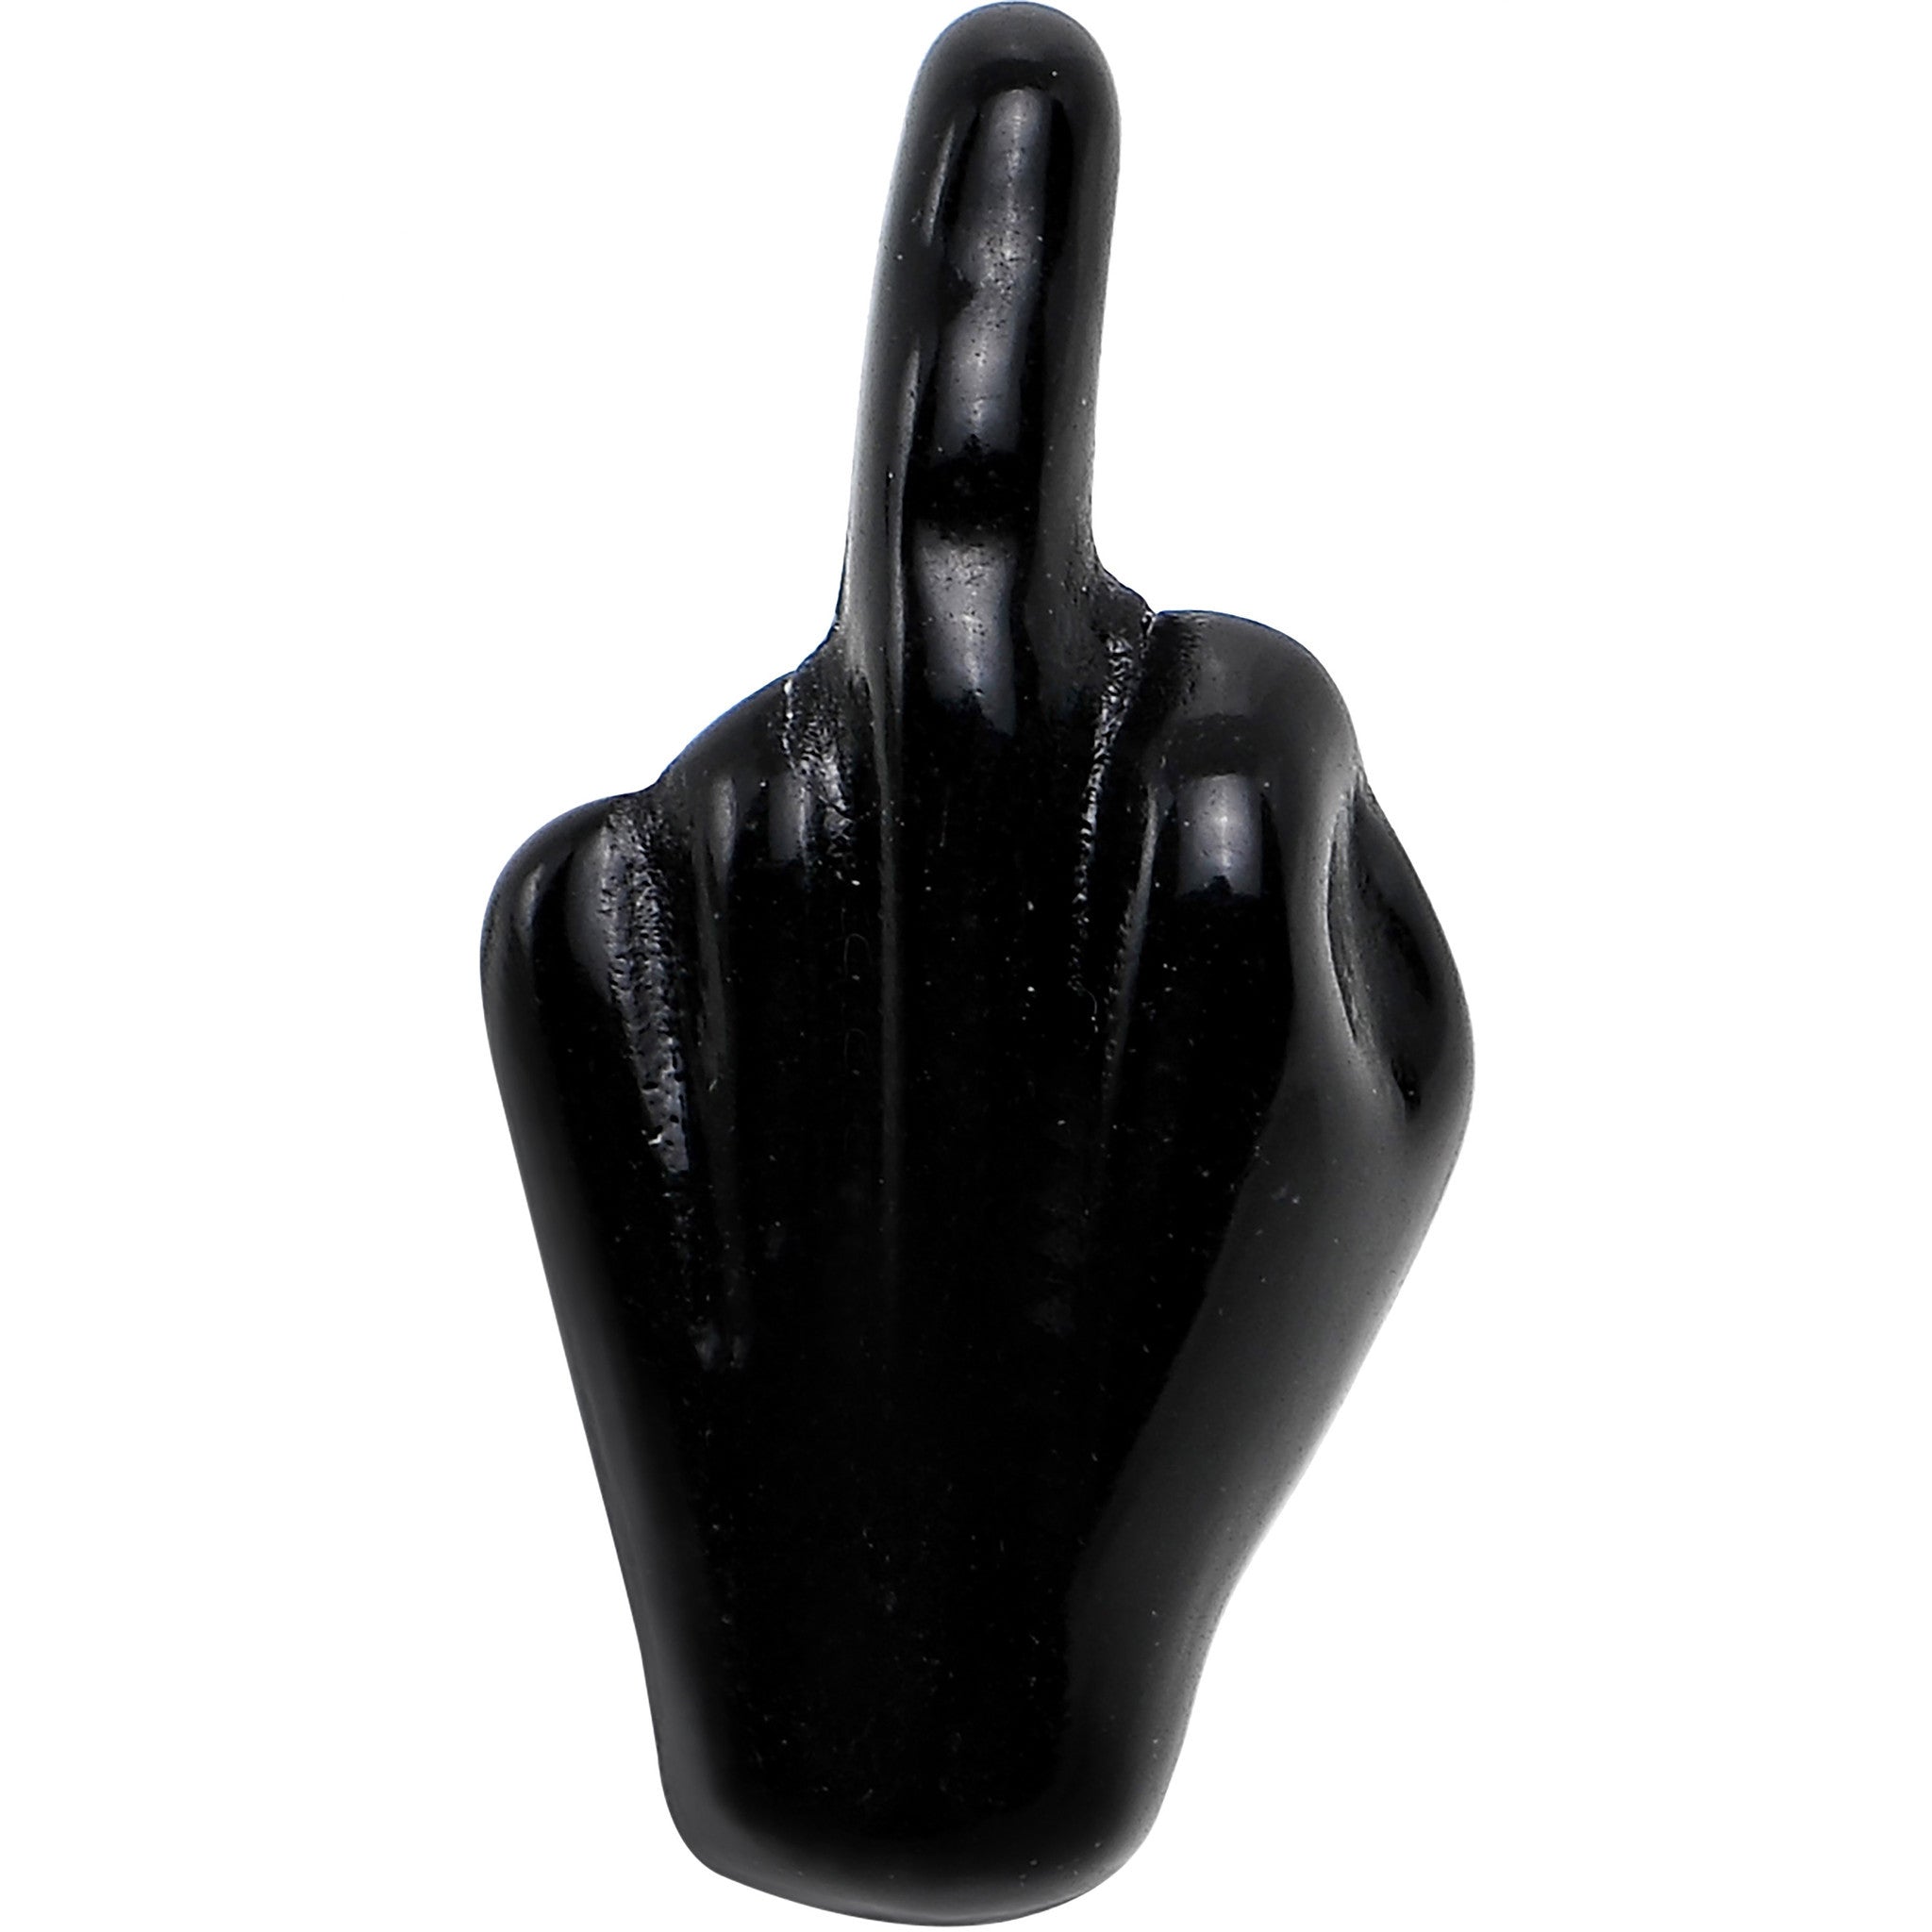 14 Gauge 5/8 Black Acrylic Flip the Middle Finger Barbell Tongue Ring